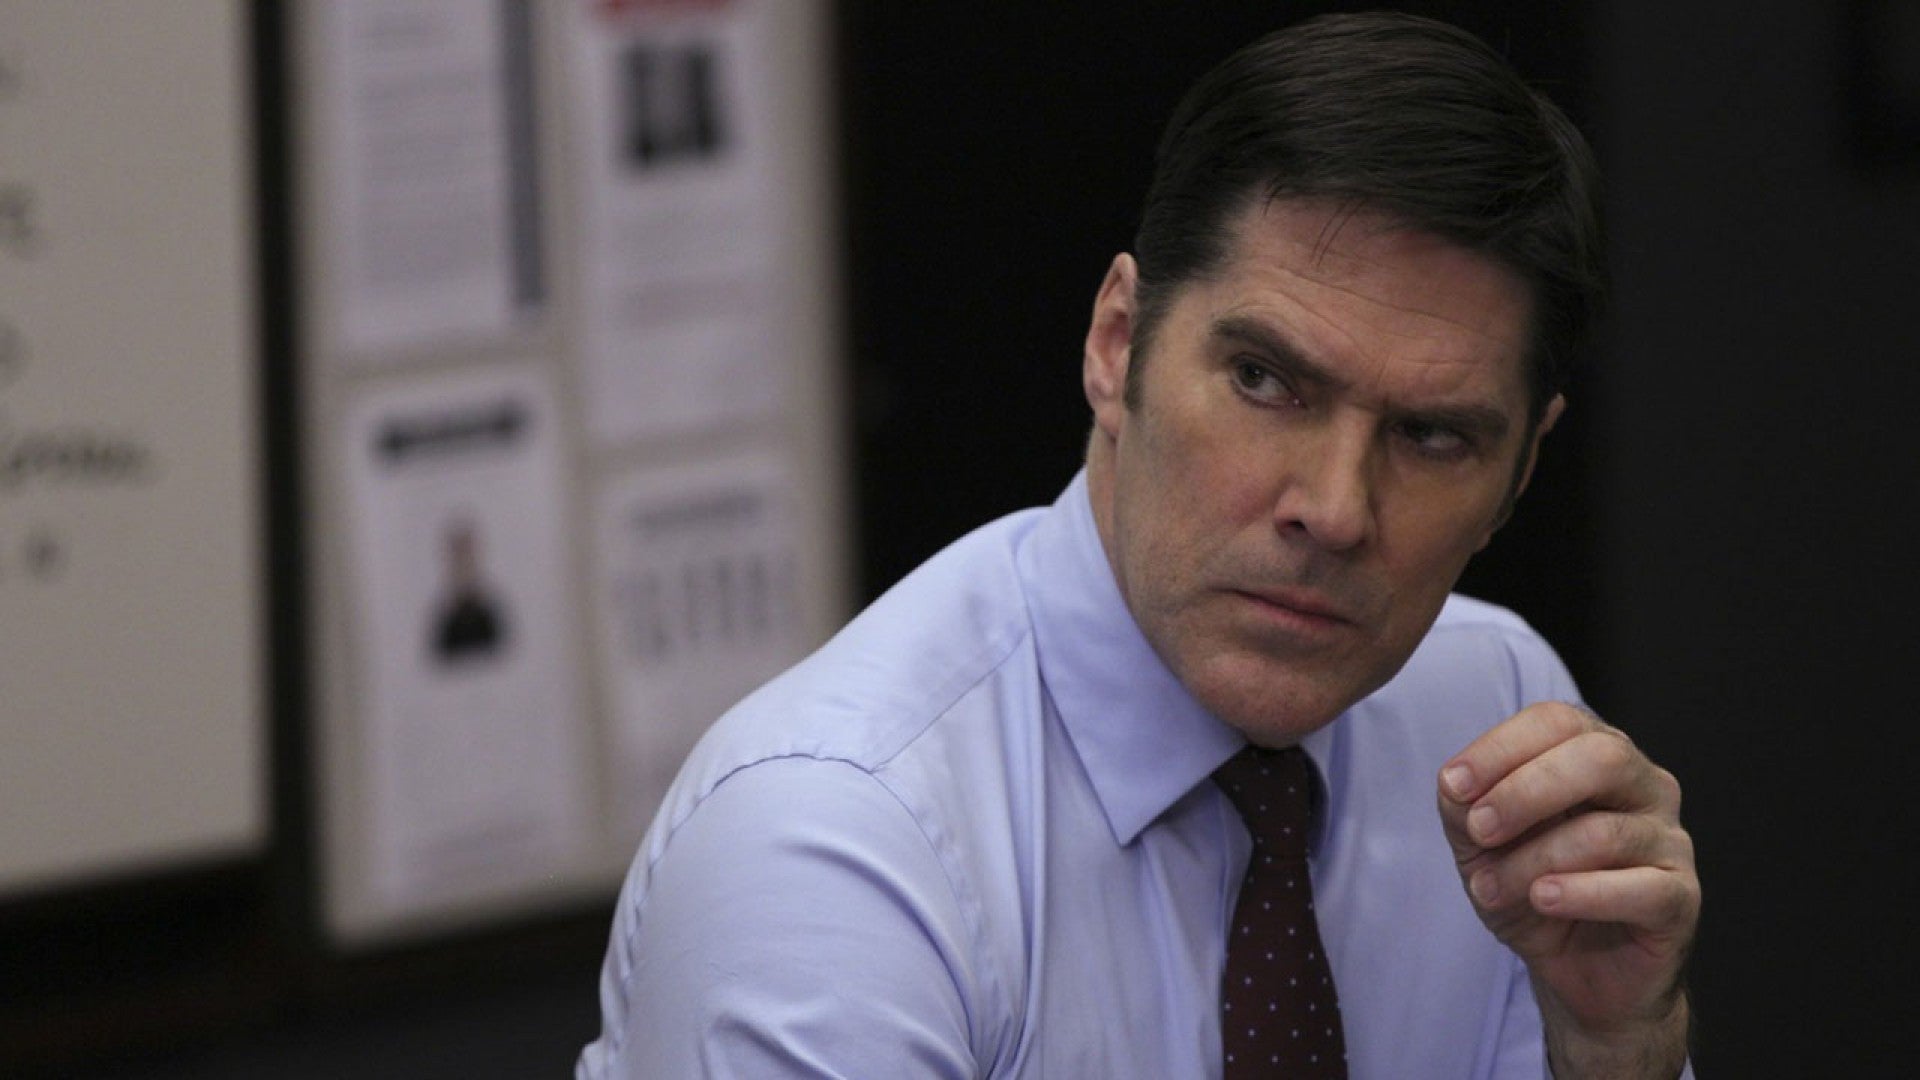 Criminal Minds' Finally Reveals What Happened to Thomas Gibson's Character